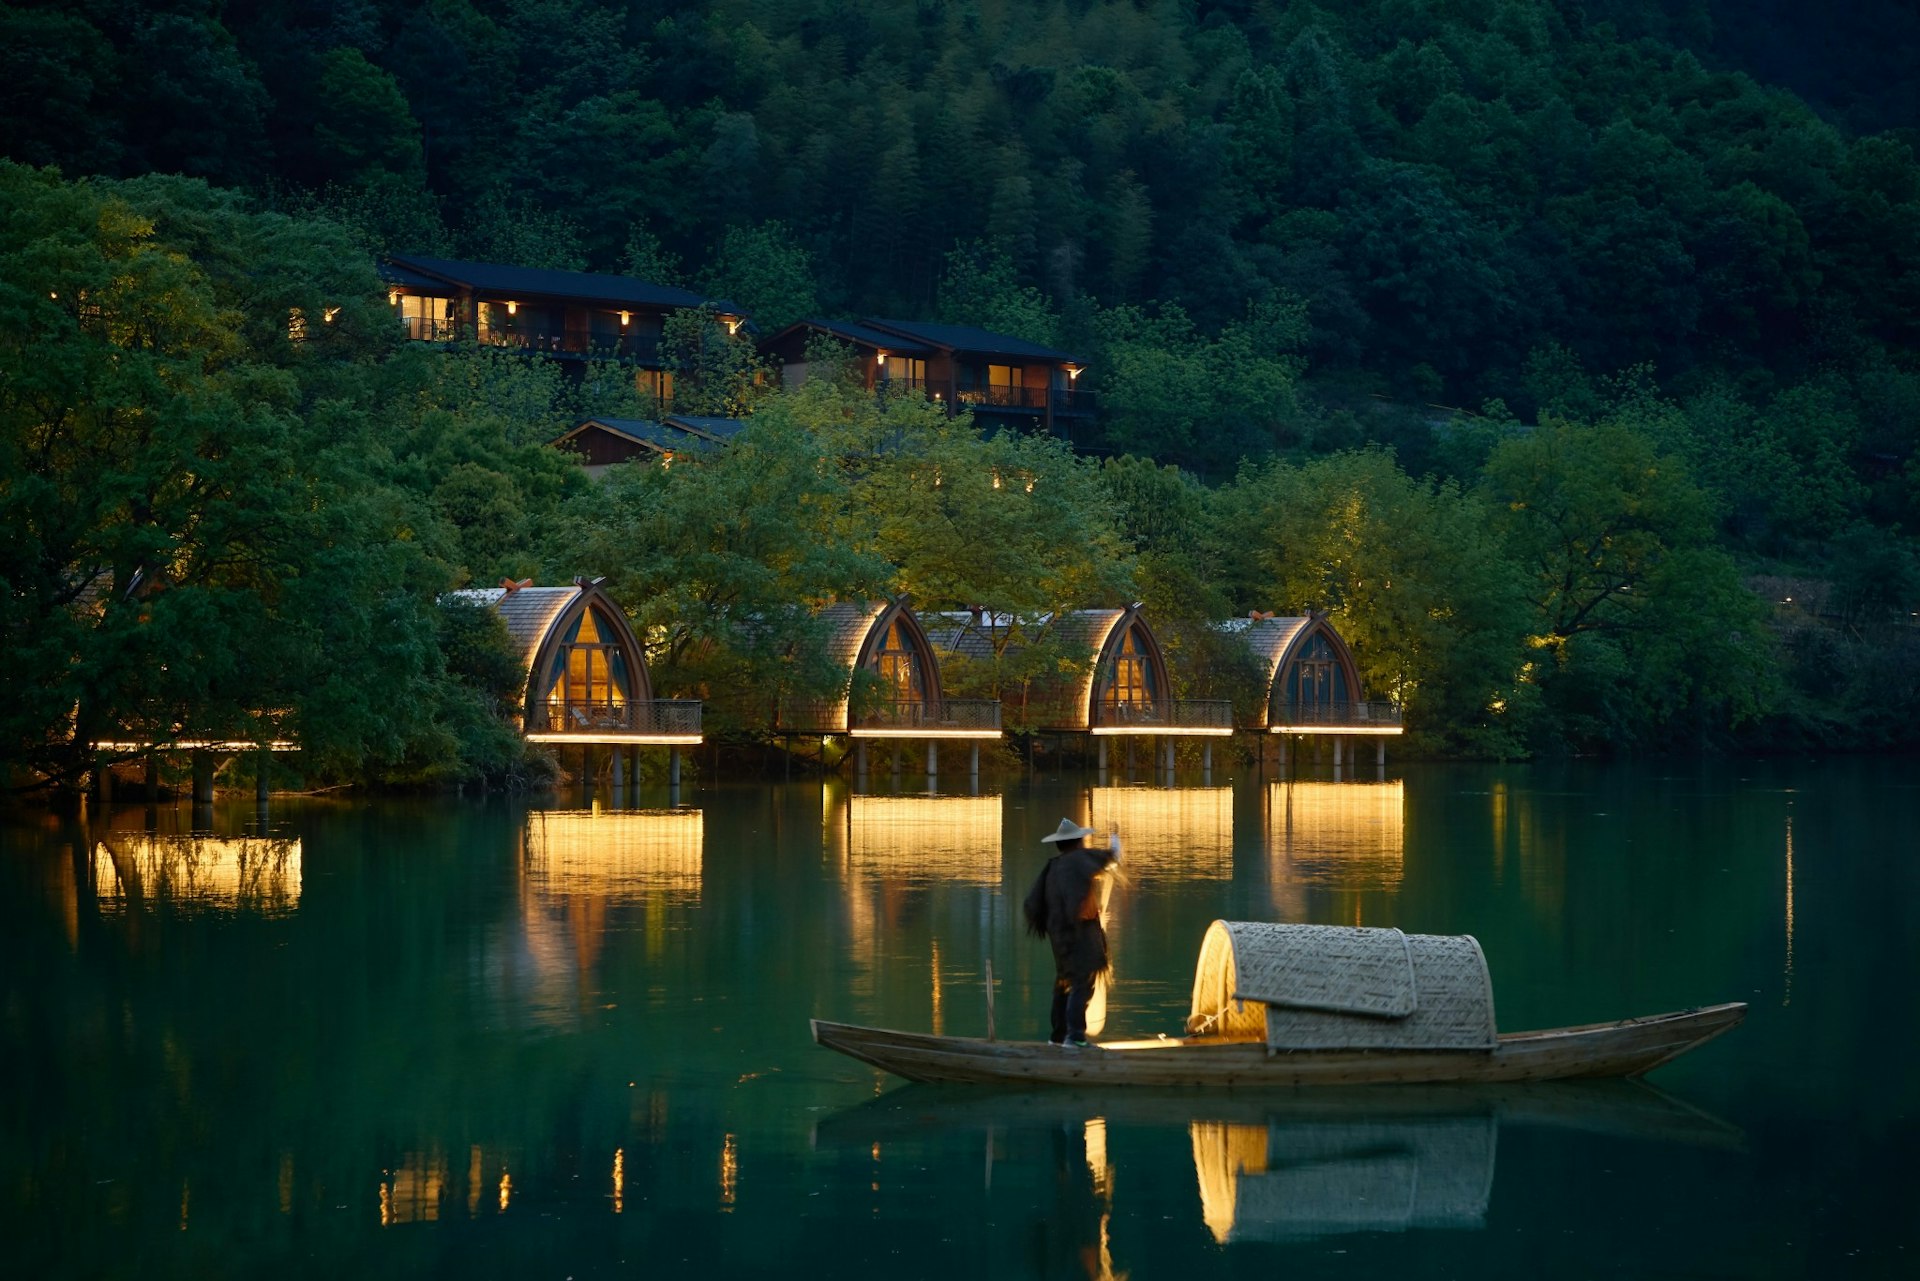 Boat Rooms on the Fuchun River in China